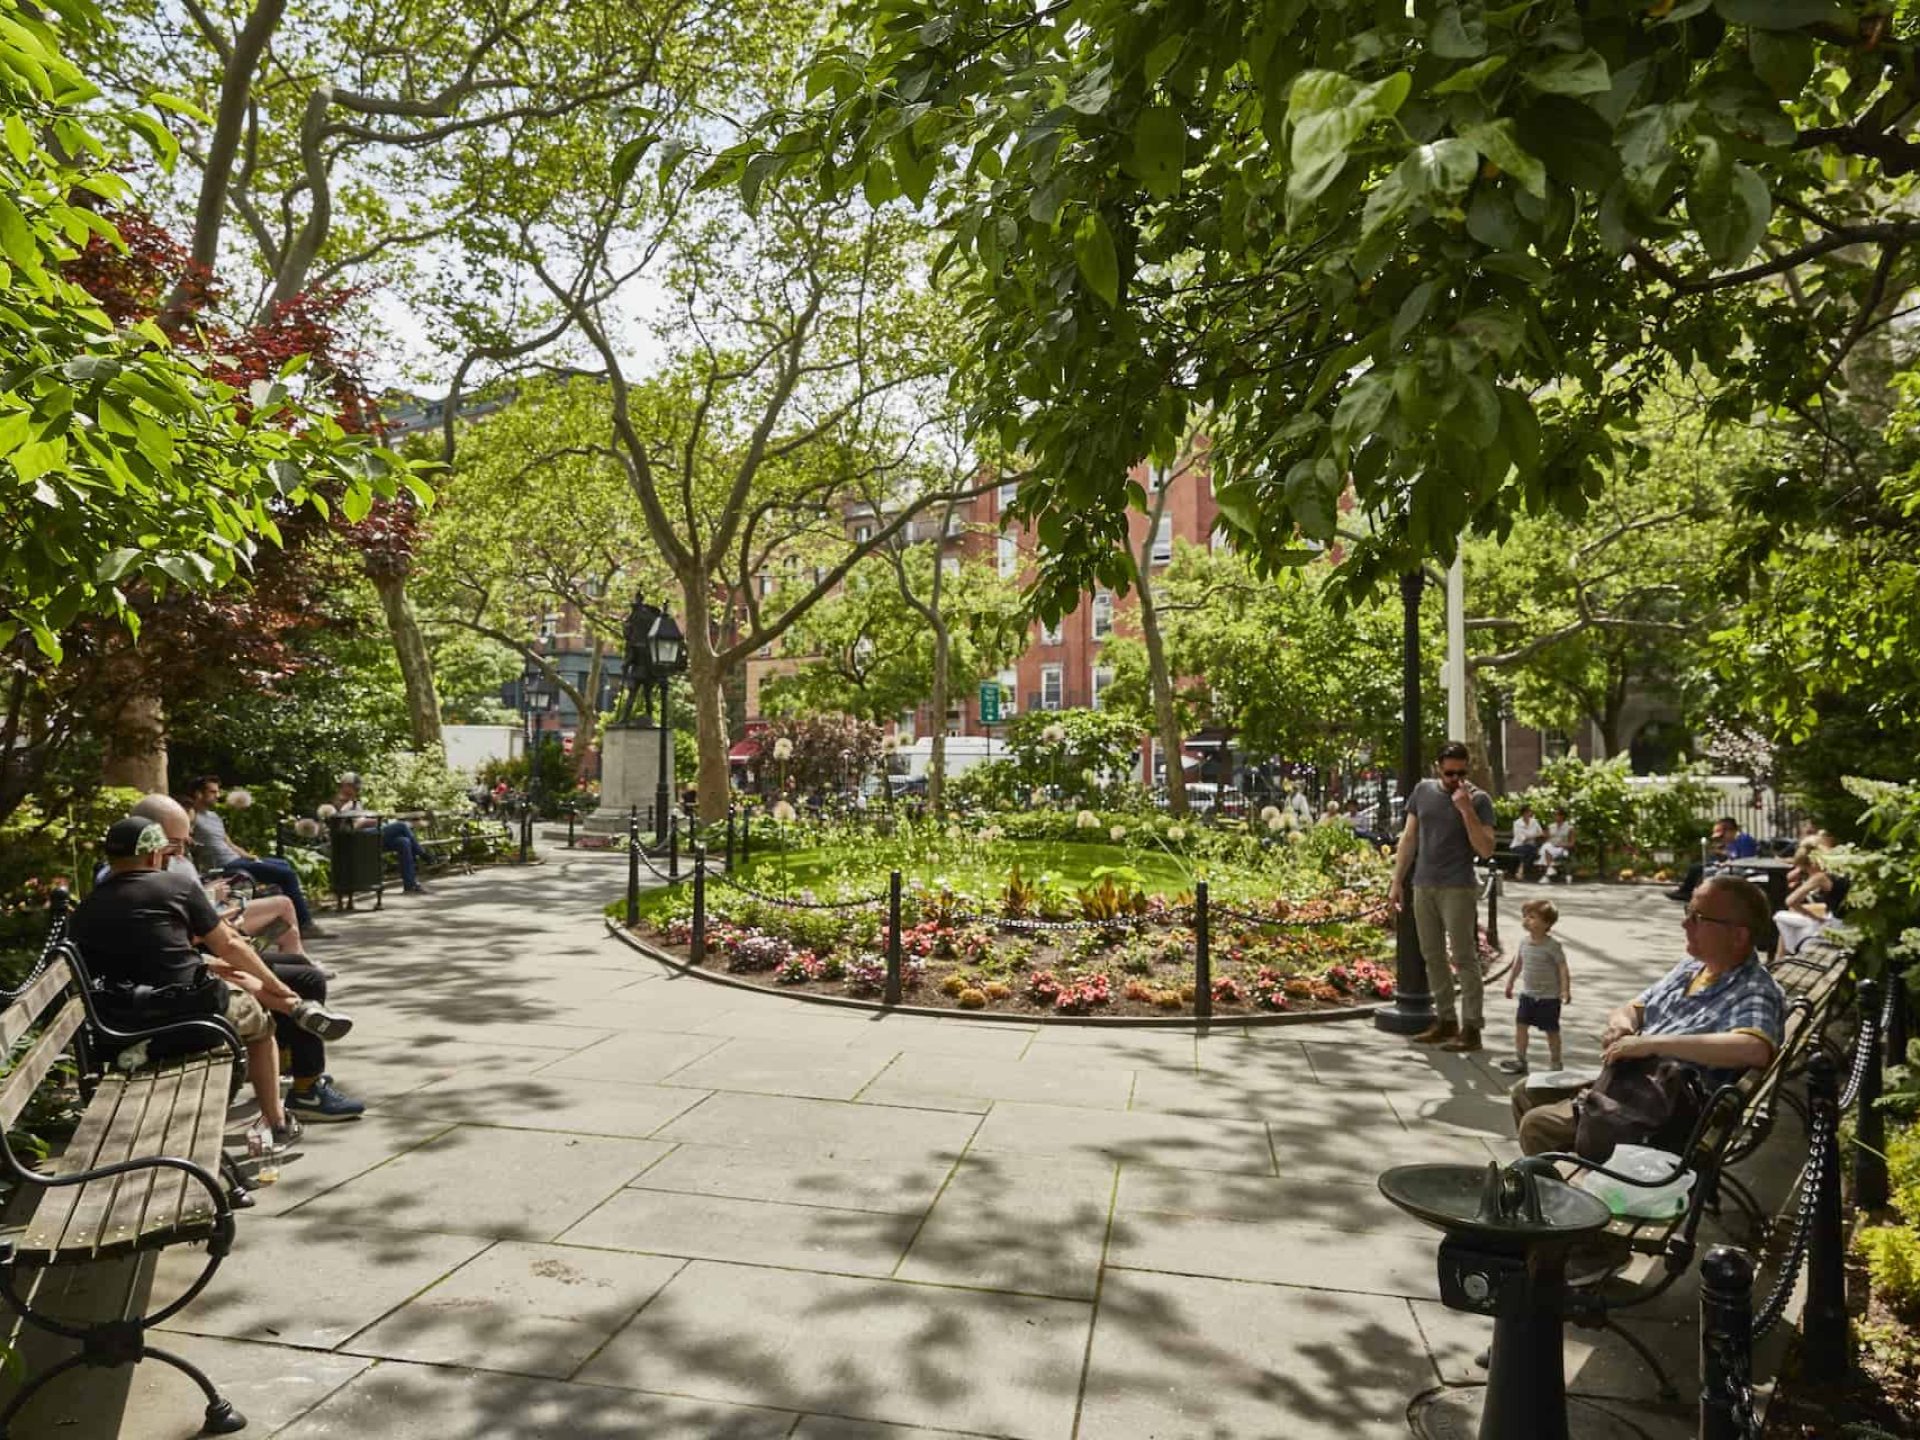 Paved circular opening in a New York City park with benches bordering the path and a raised flower bed in the middle.